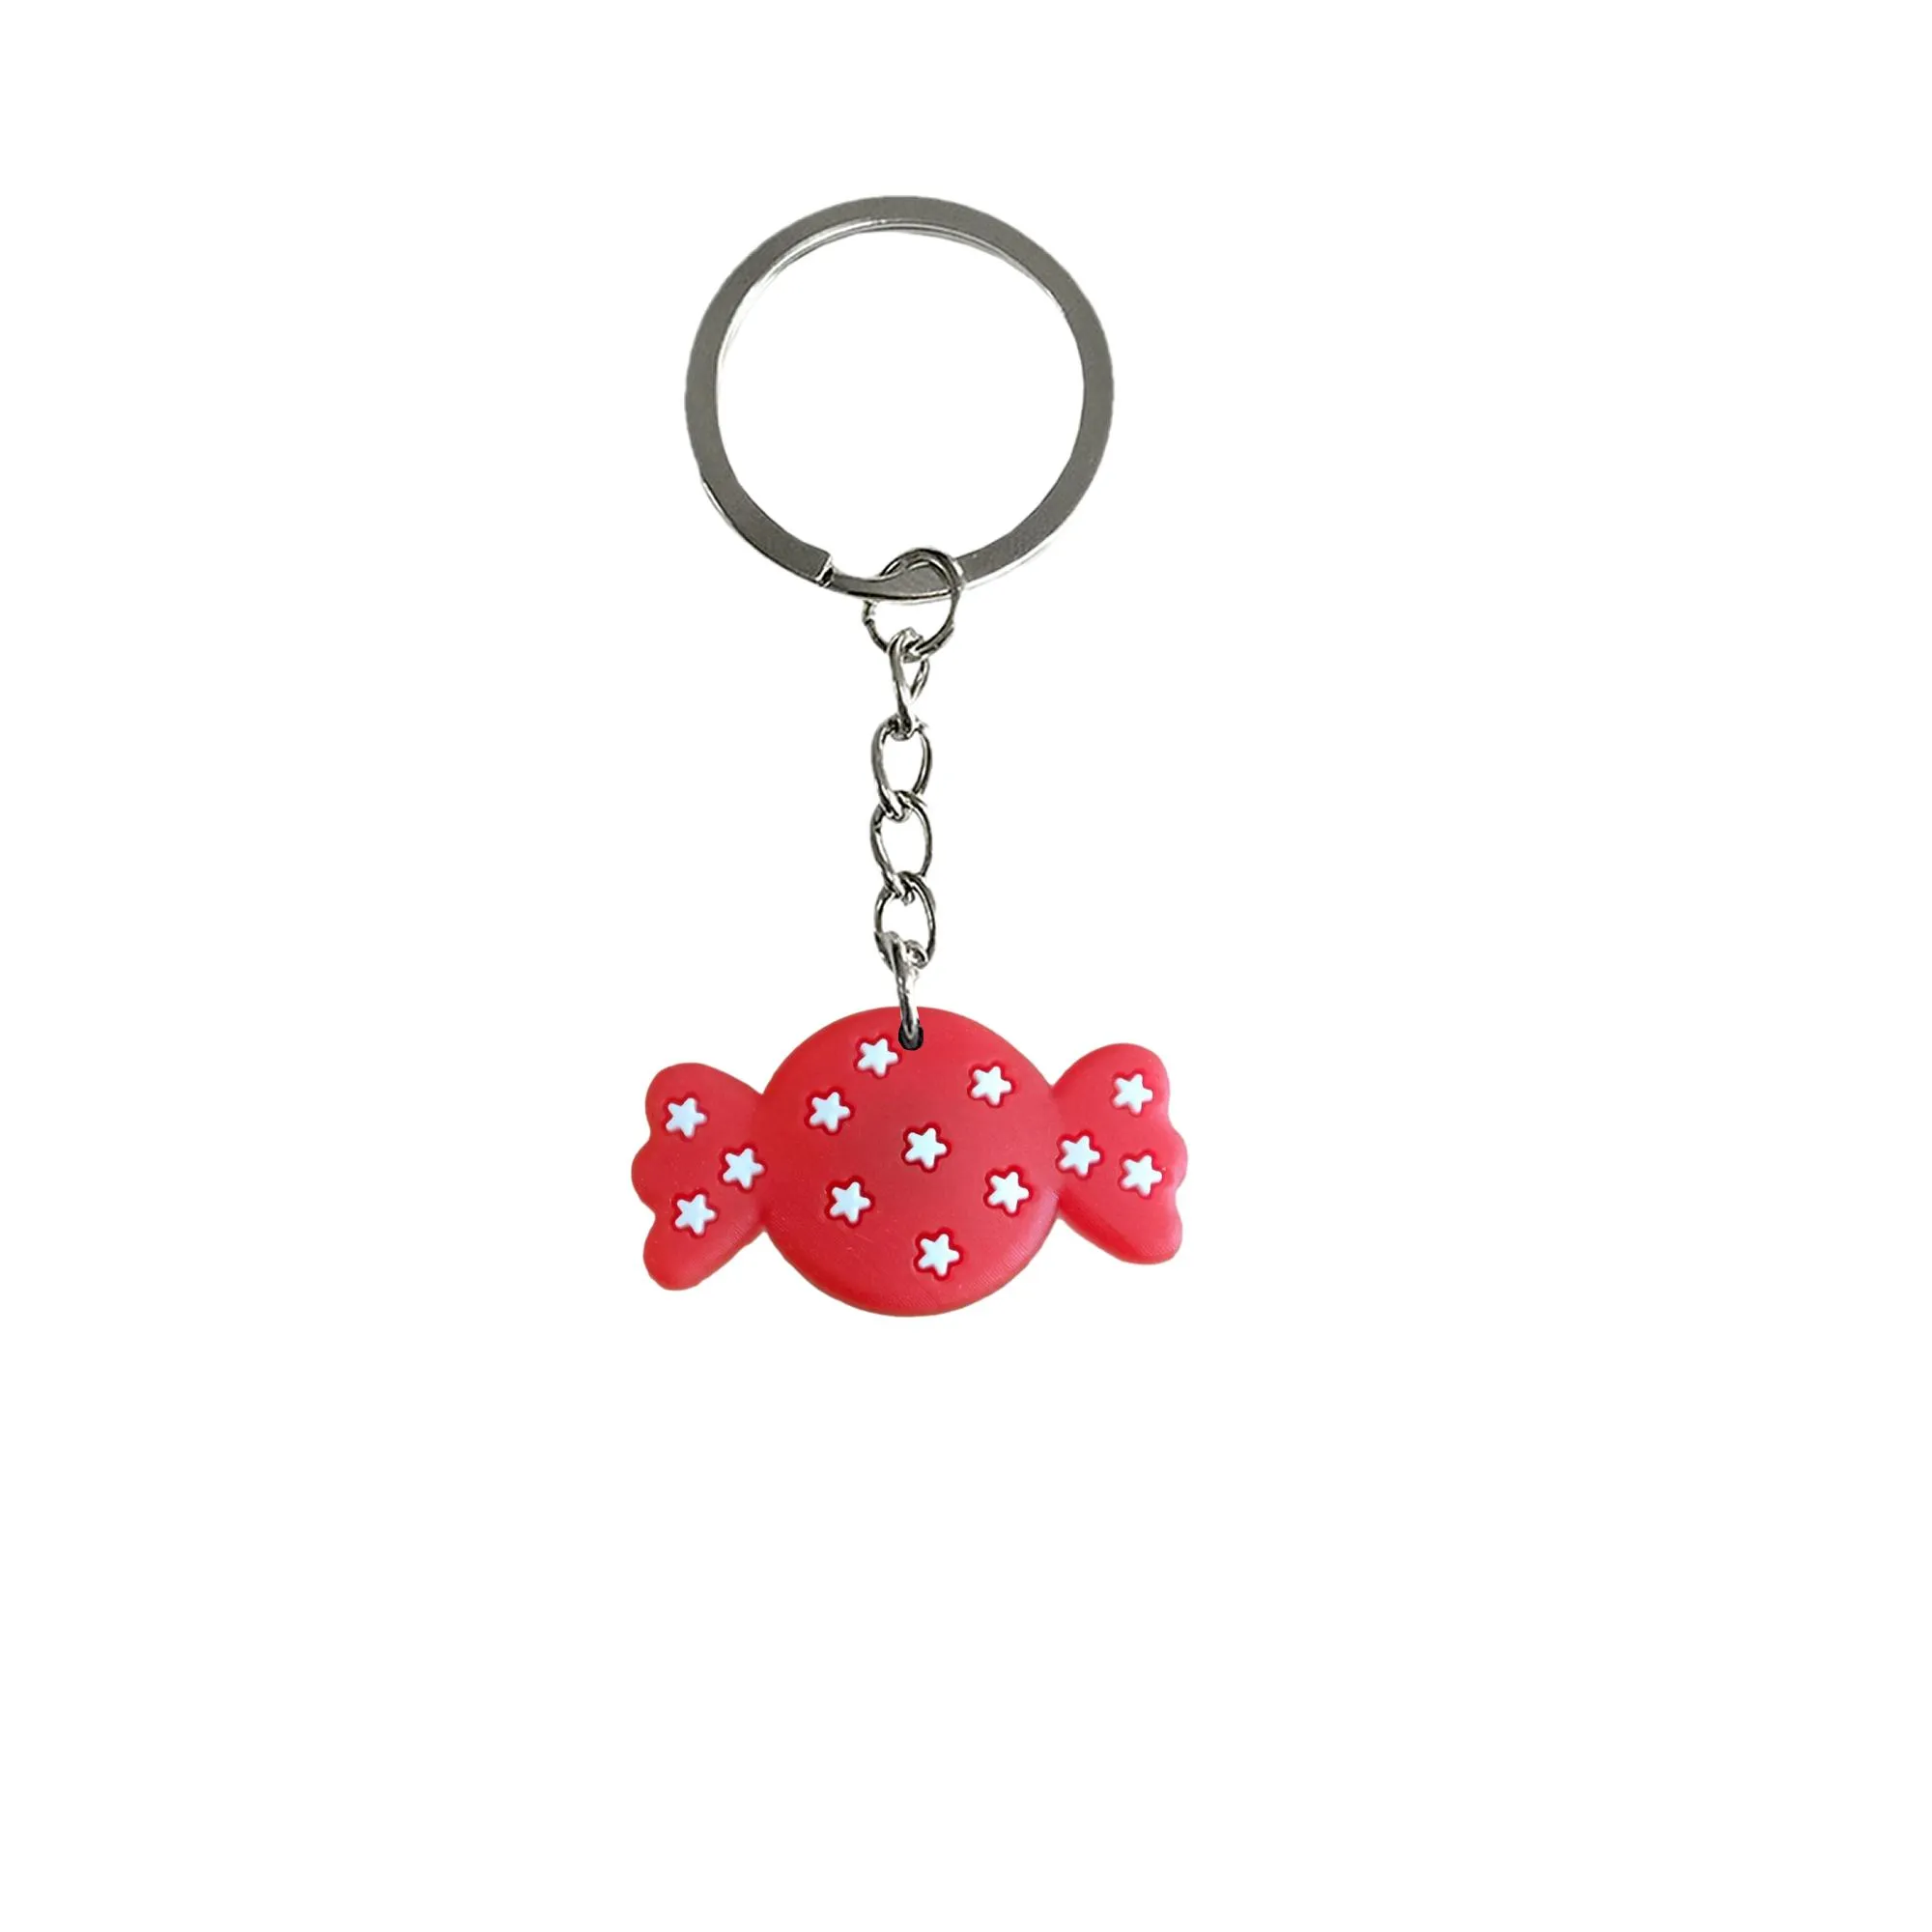 candy keychain keyring for classroom school day birthday party supplies gift christmas favors keychains childrens suitable schoolbag backpack key chain accessories handbag and car valentines pendant bags